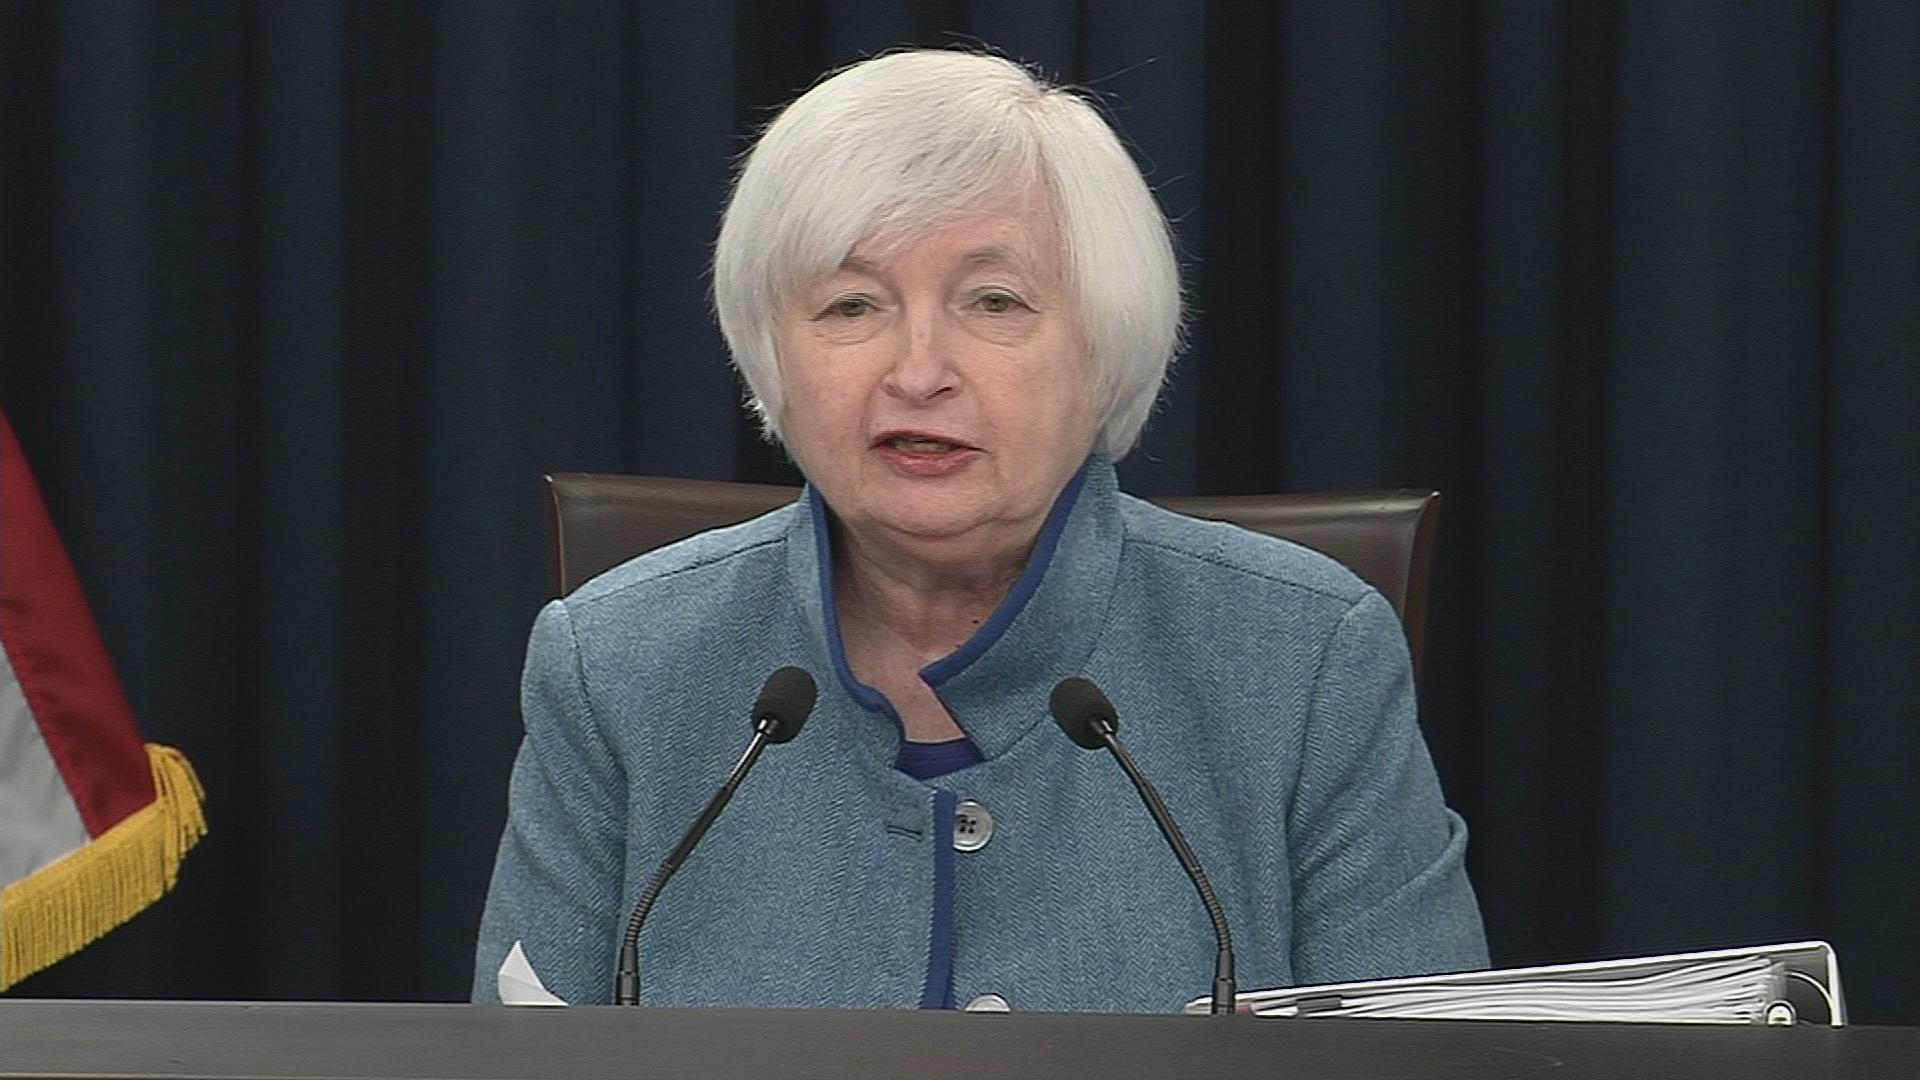 “My colleagues and I are recognizing the considerable progress the economy has made toward our dual objectives of maximum employment and price stability,” Janet Yellen said last week. “We expect the economy will continue to perform well.” (Courtesy of CNN)